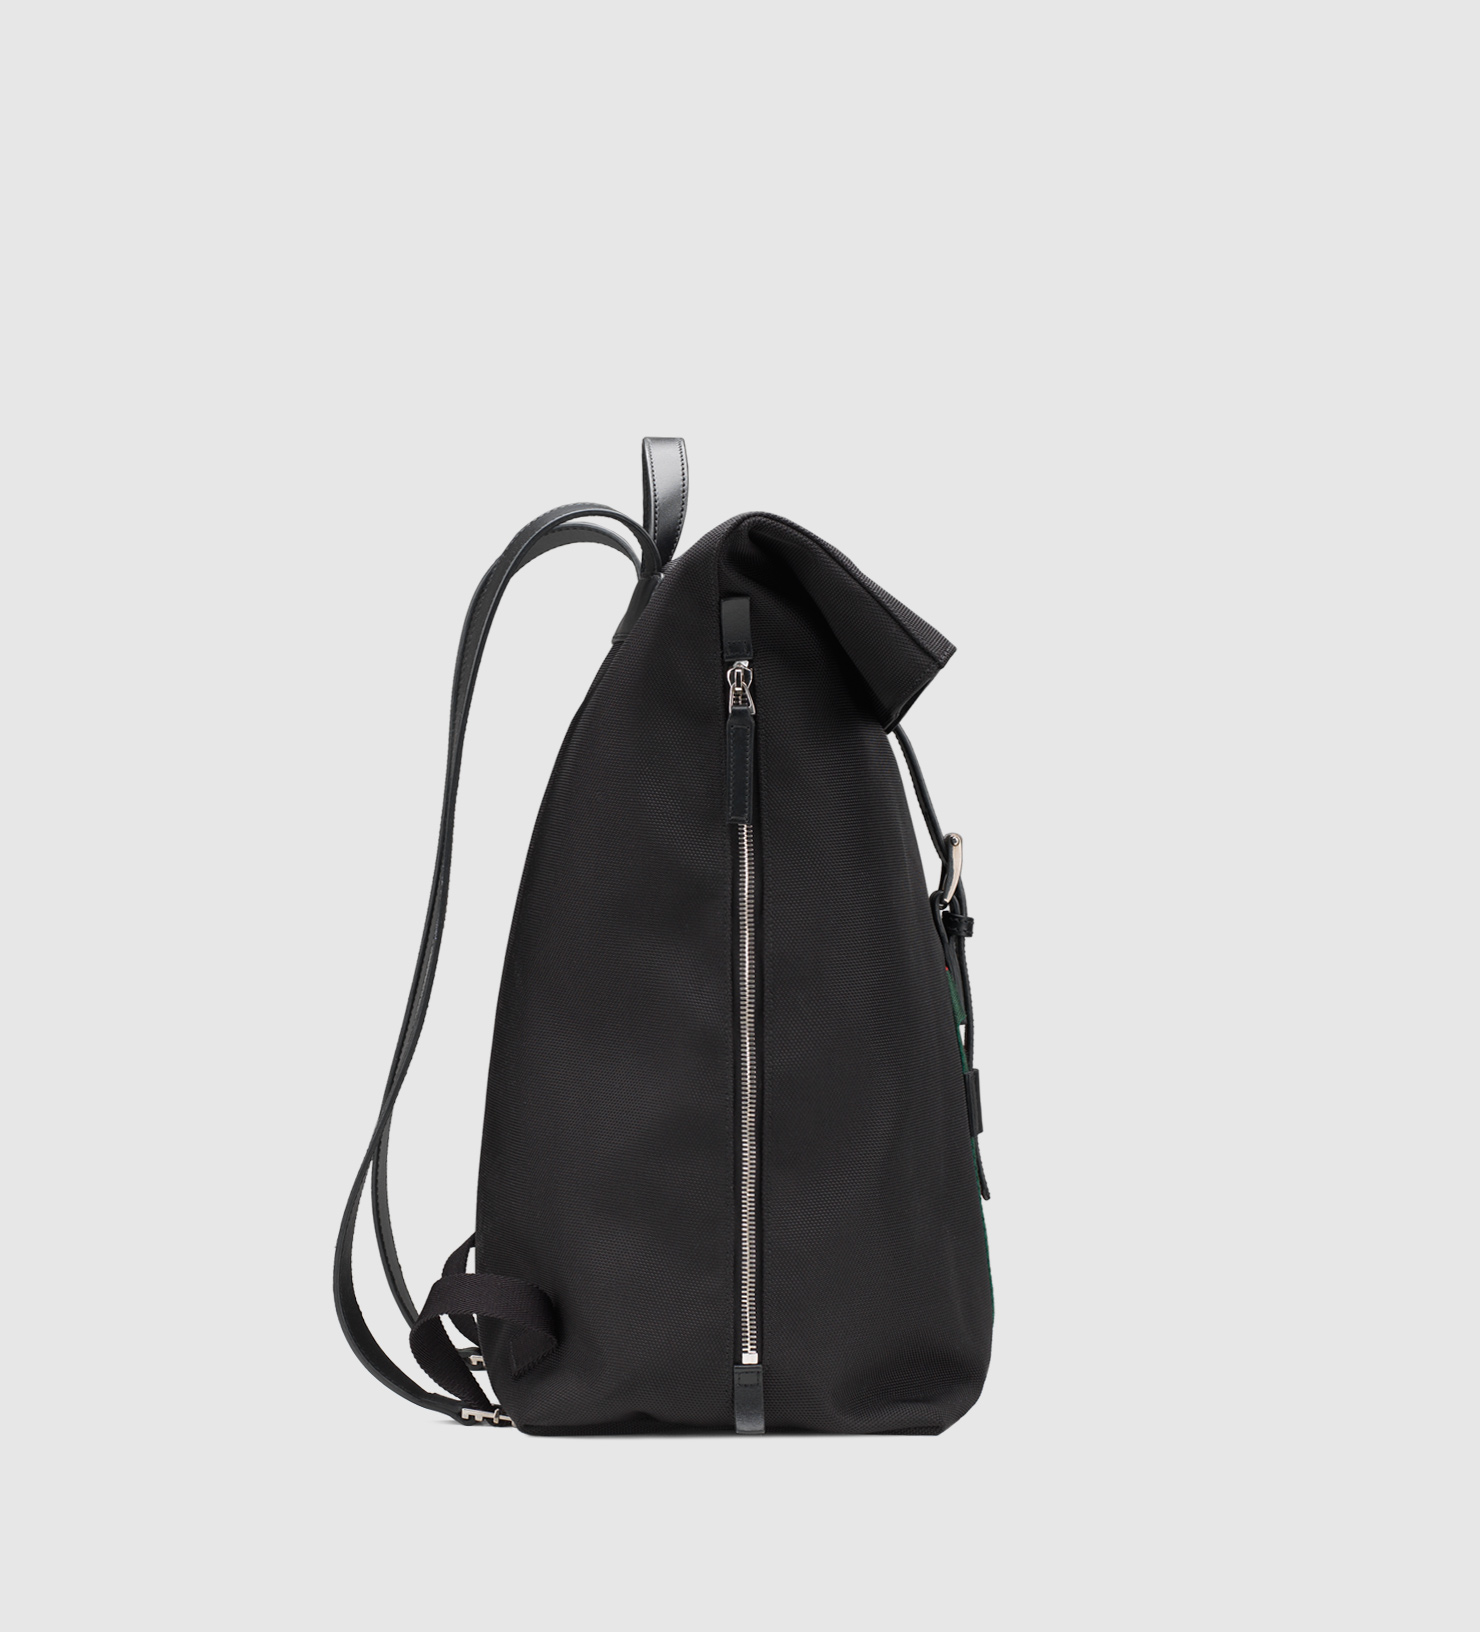 Gucci Black Techno Canvas Backpack in Black for Men - Lyst